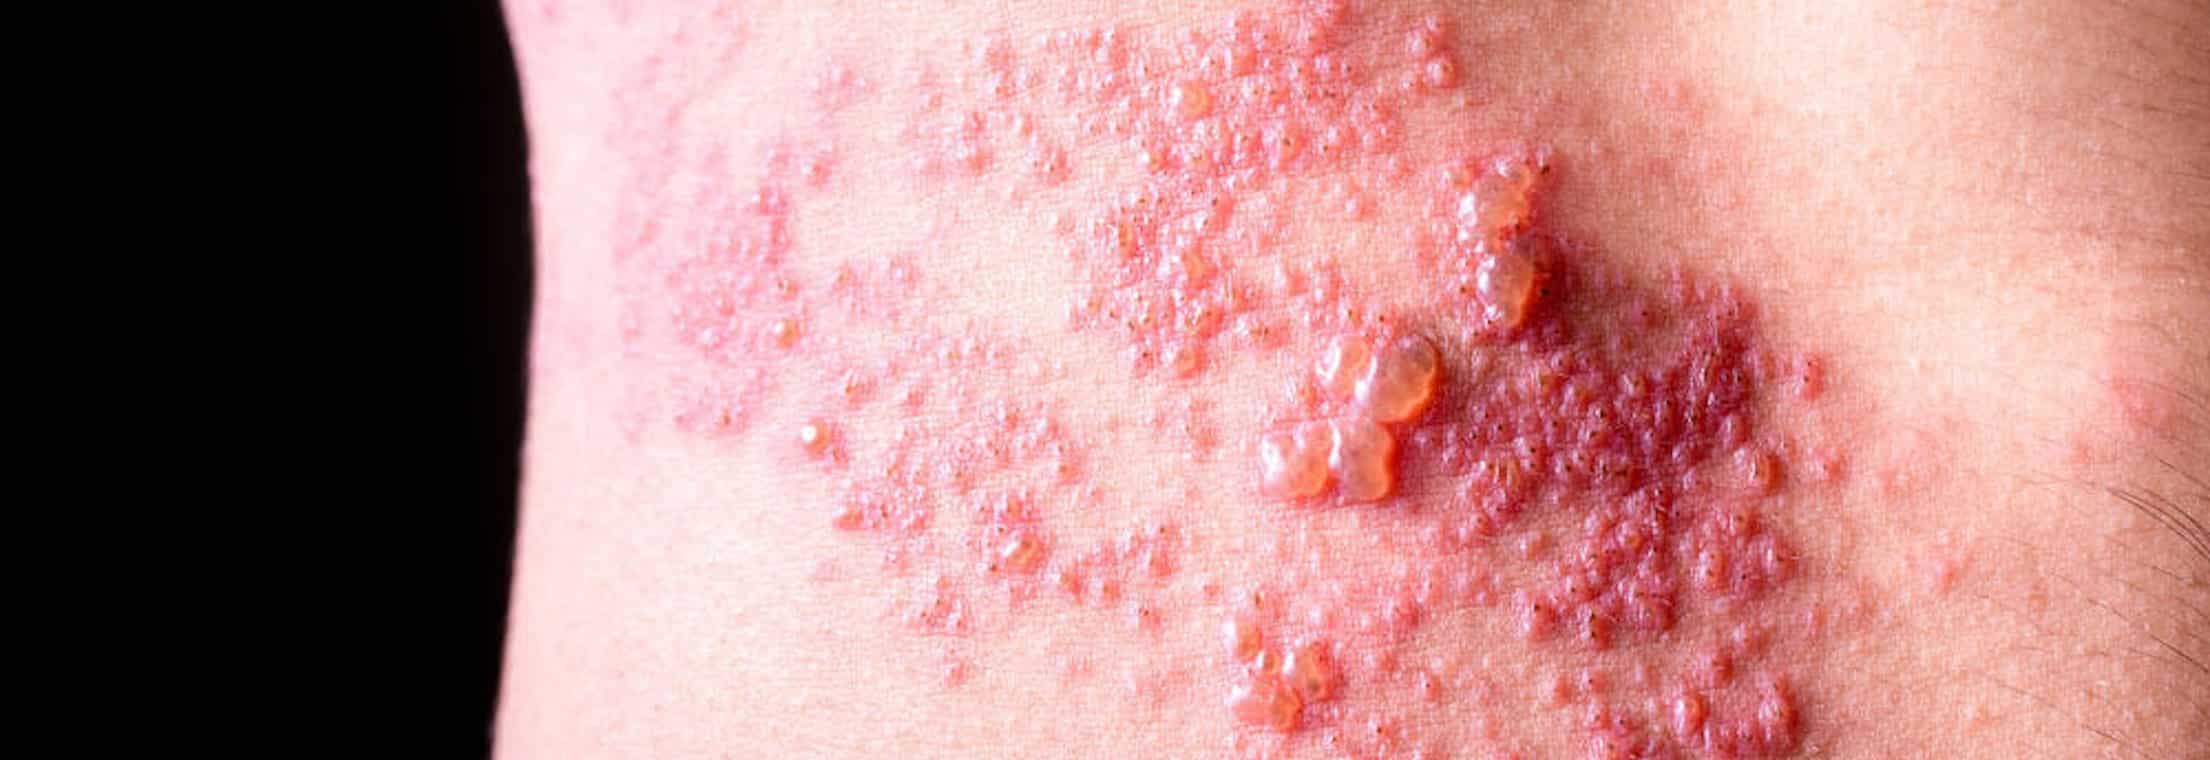 Can I Still Get Herpes Zoster (Shingles) After